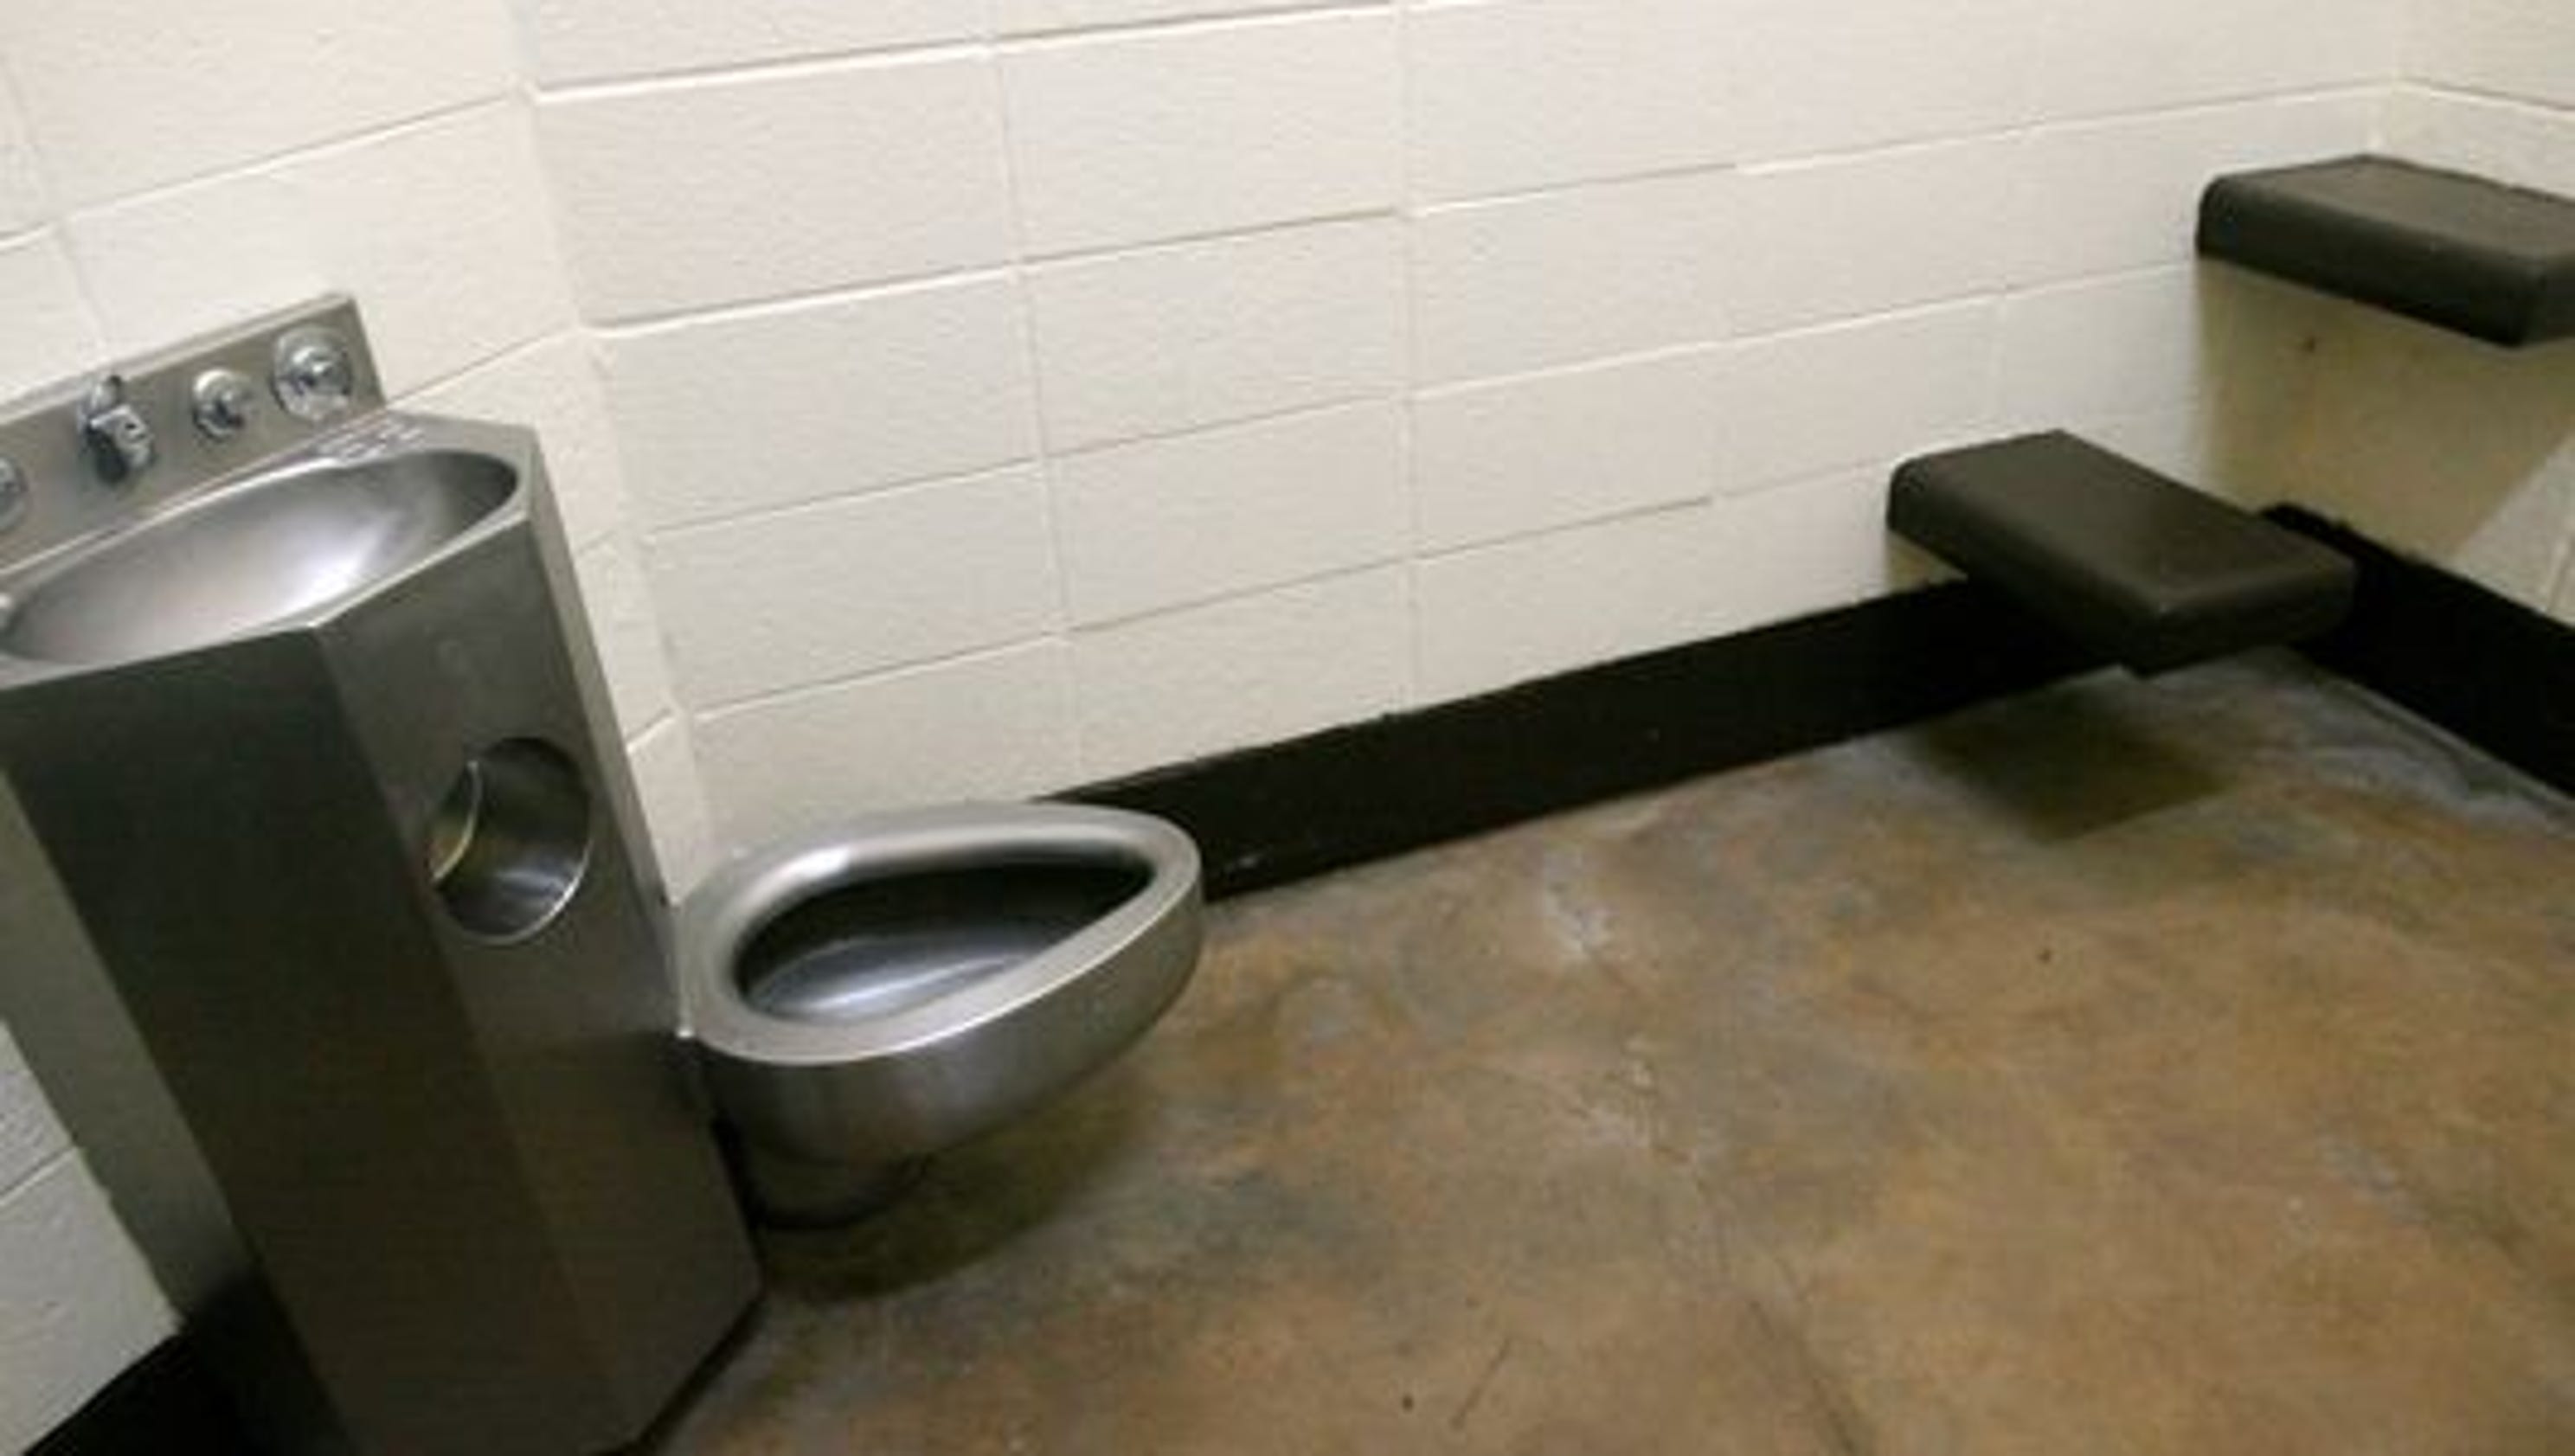 Fifty Lawsuits Have Now Been Filed Over Riverside County Jail Toilets